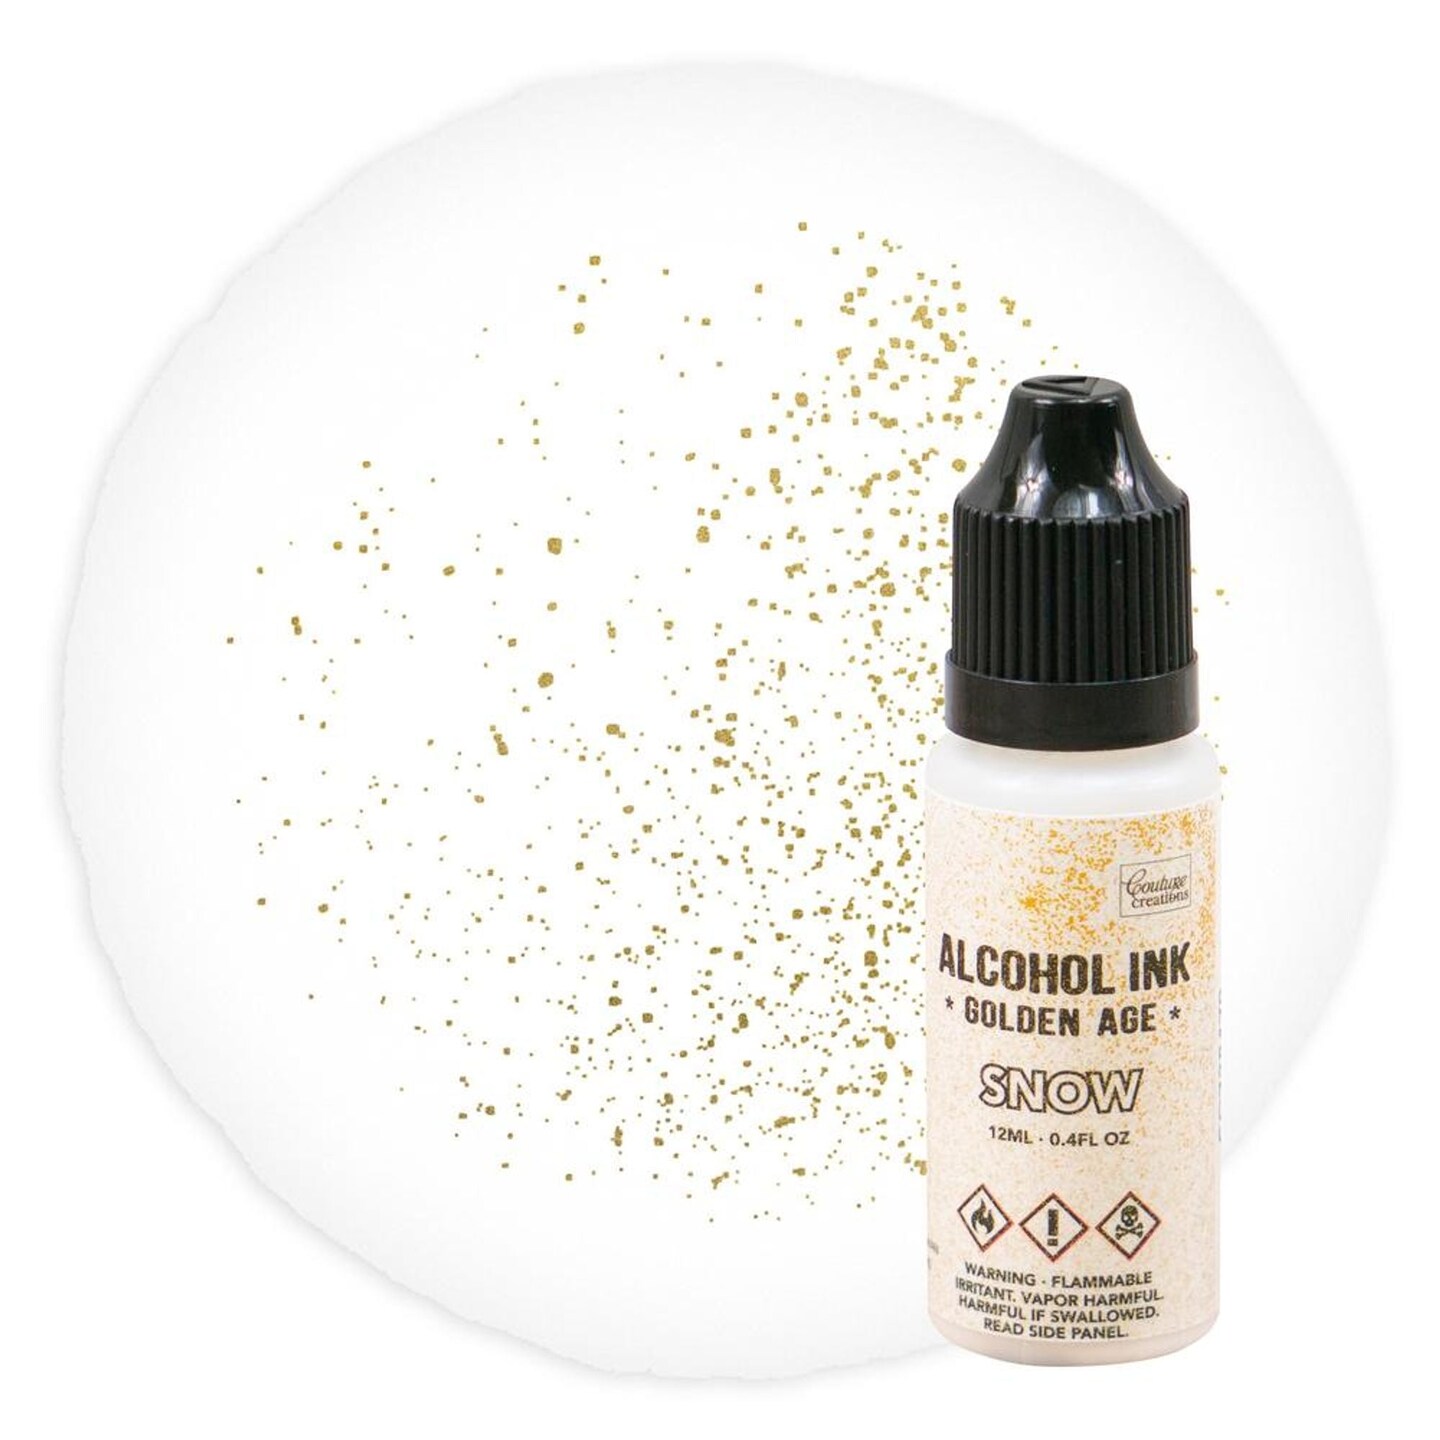 Couture Creations Alcohol Ink Golden Age 12mL | 0.4fl oz - Baby Pink